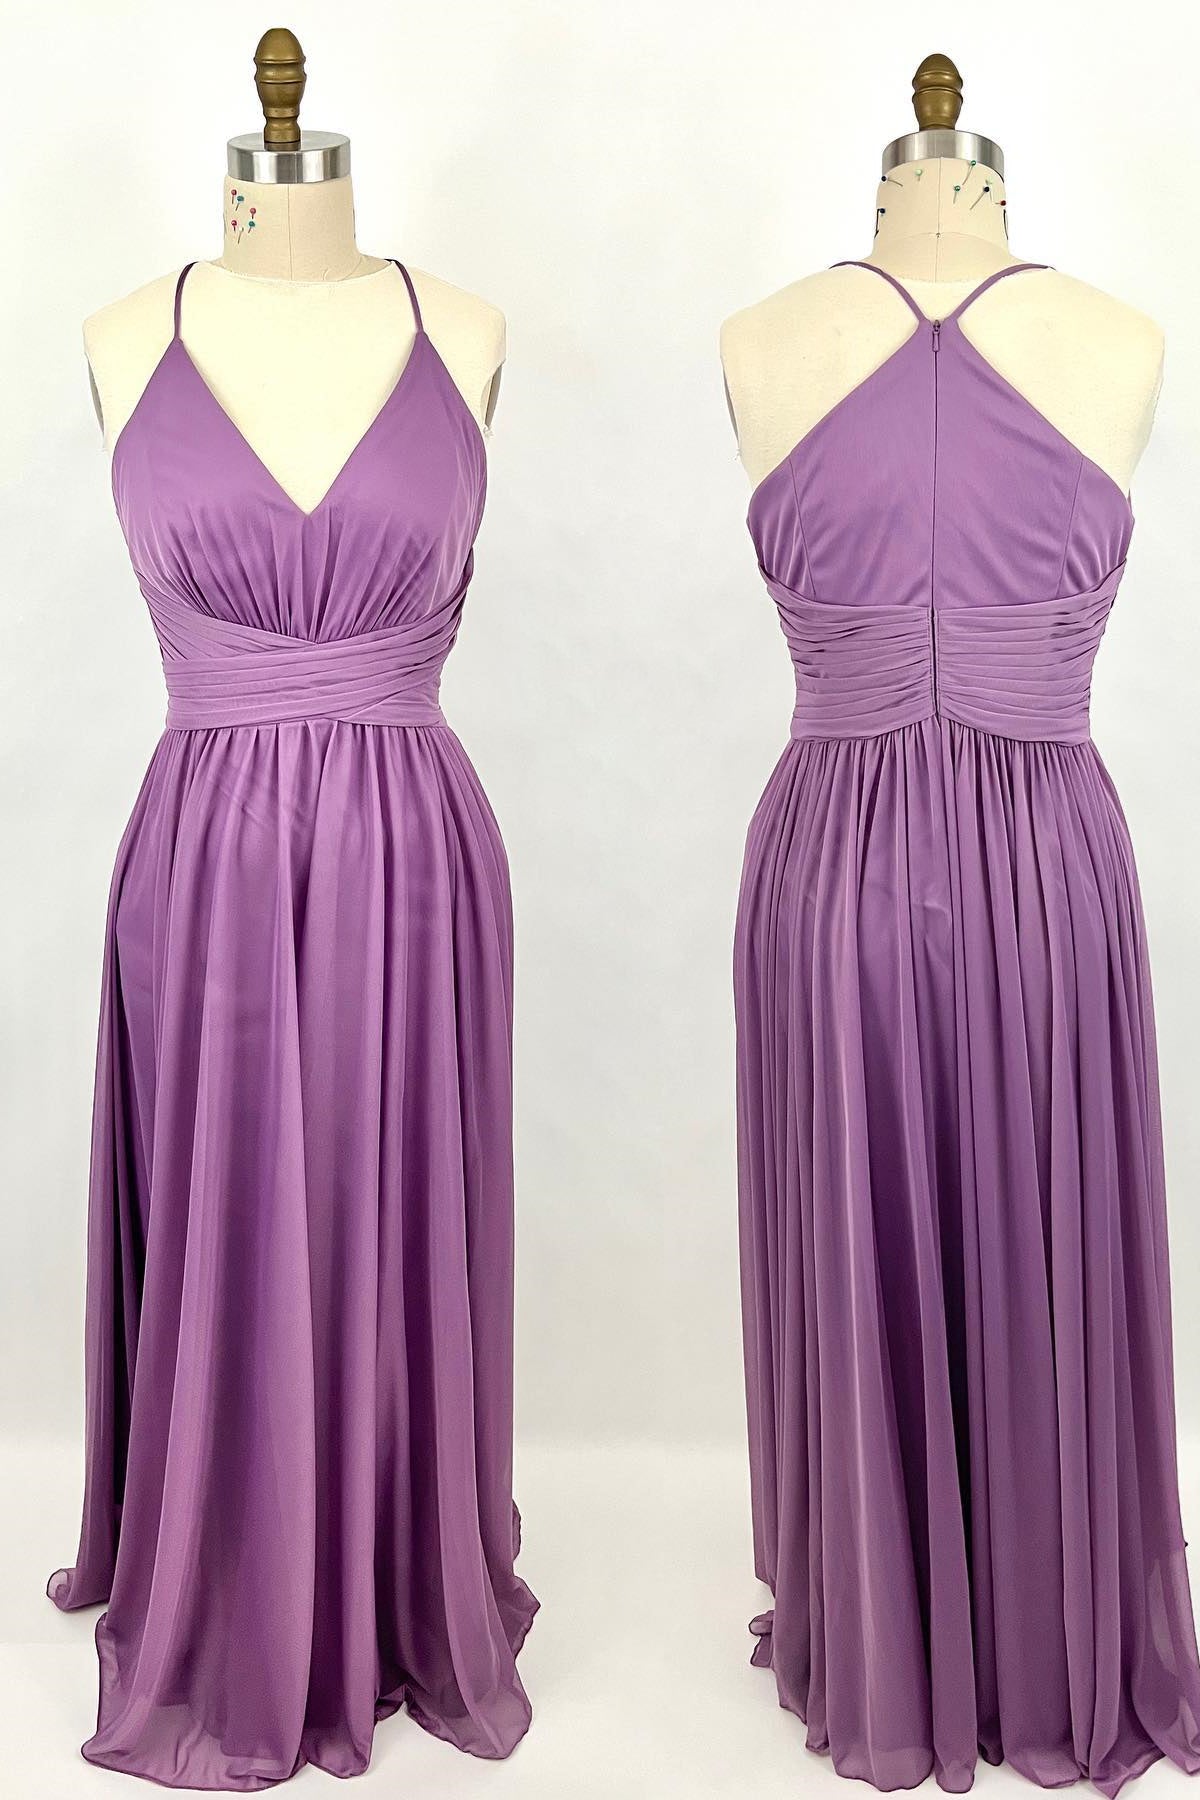 Homecoming Dresses Fitted, Purple Straps A-line Long Bridesmaid Dress